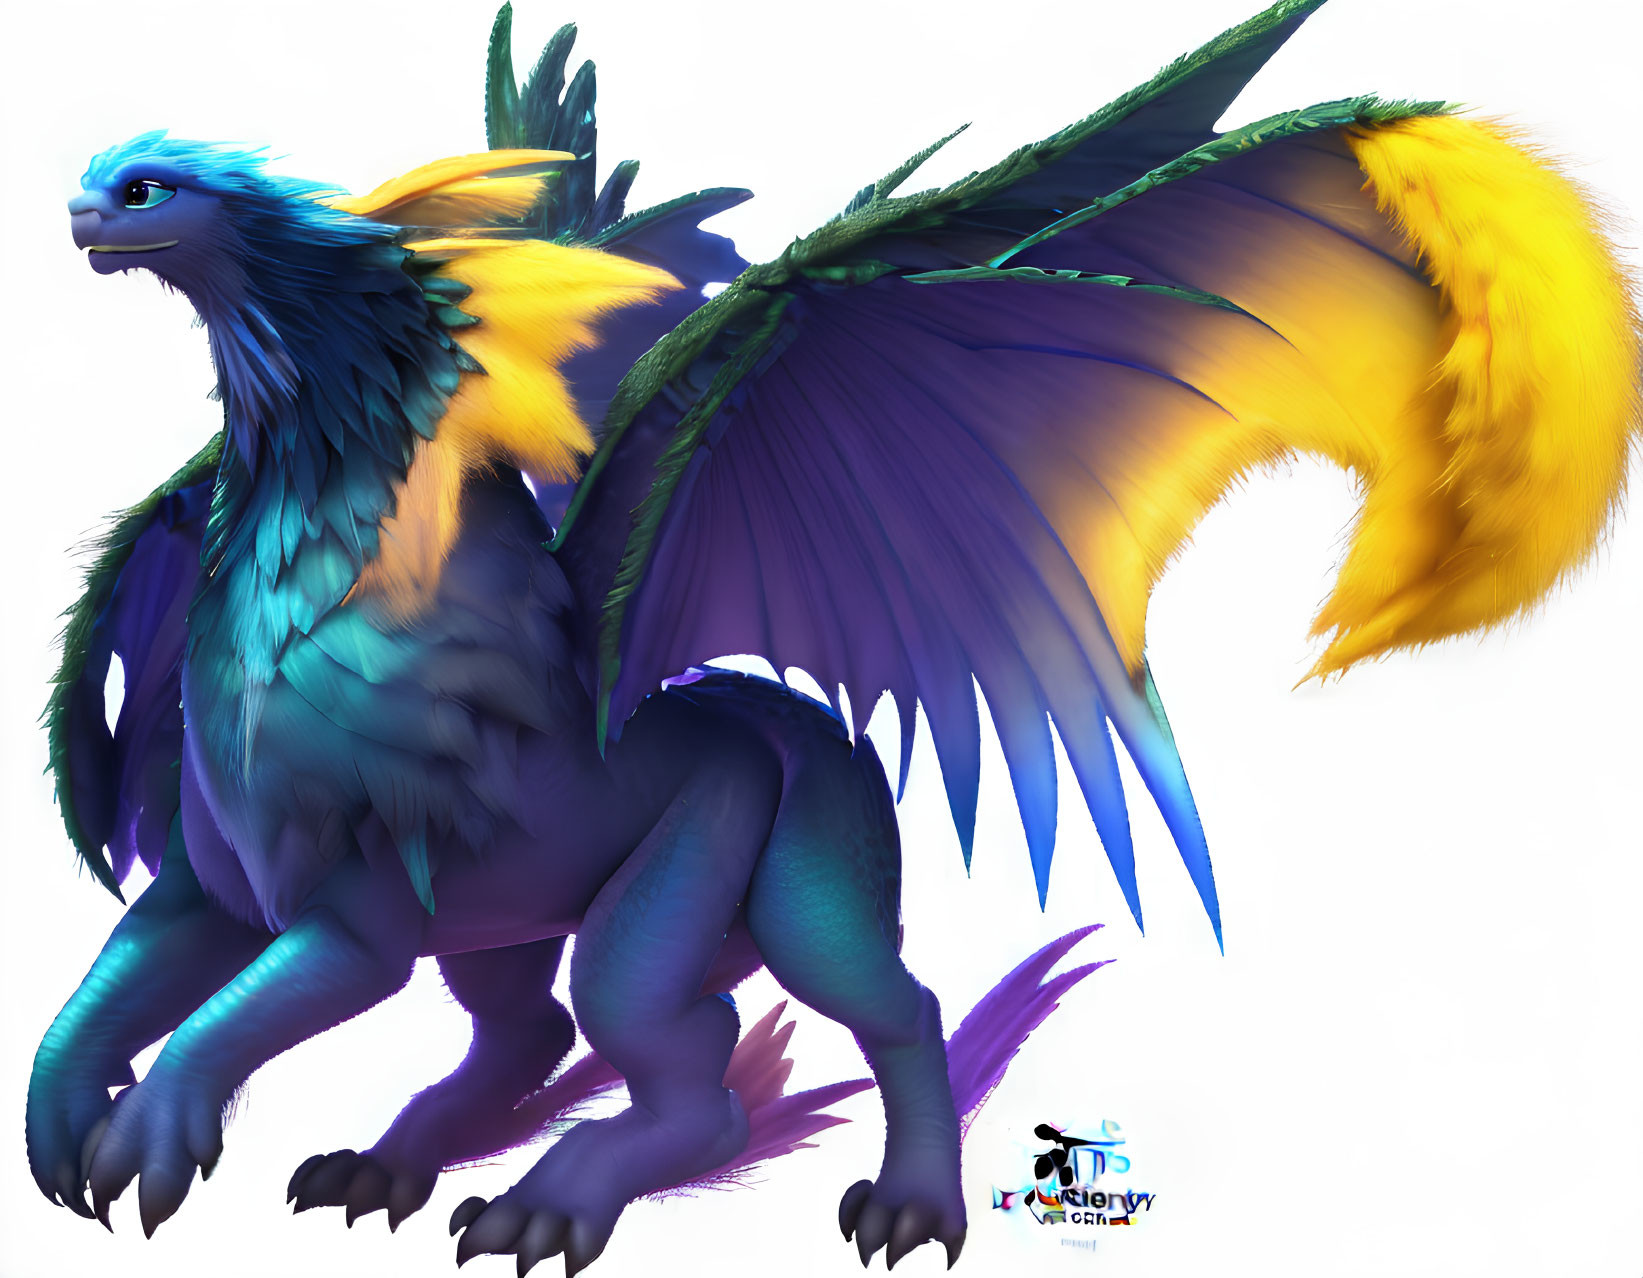 Mythical creature digital artwork: dragon with blue and yellow plumage